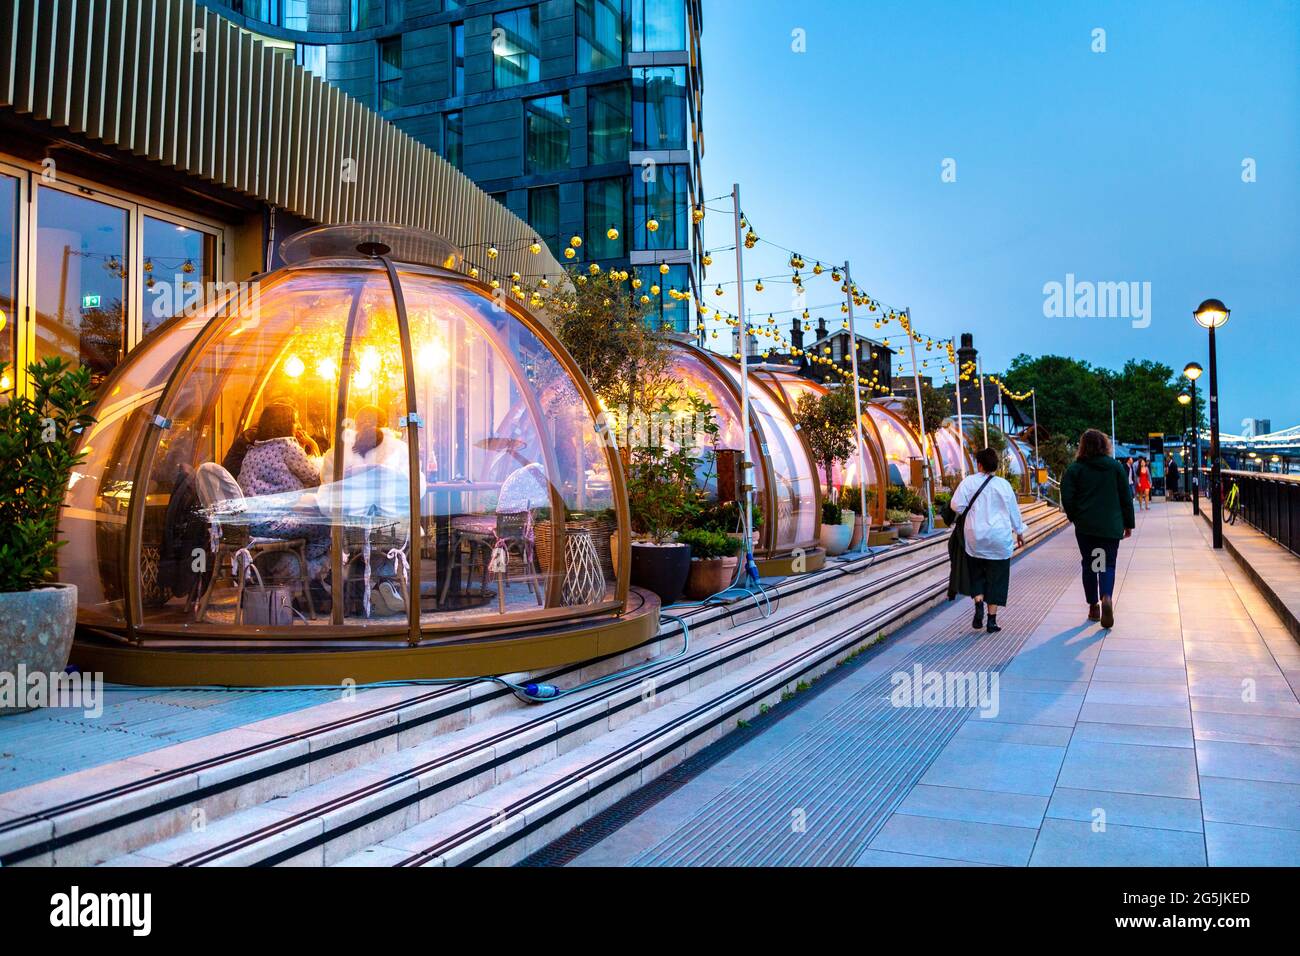 Dining igloos at Coppa Club restaurant on the Thames riverbank, Tower, Hill, London, UK Stock Photo